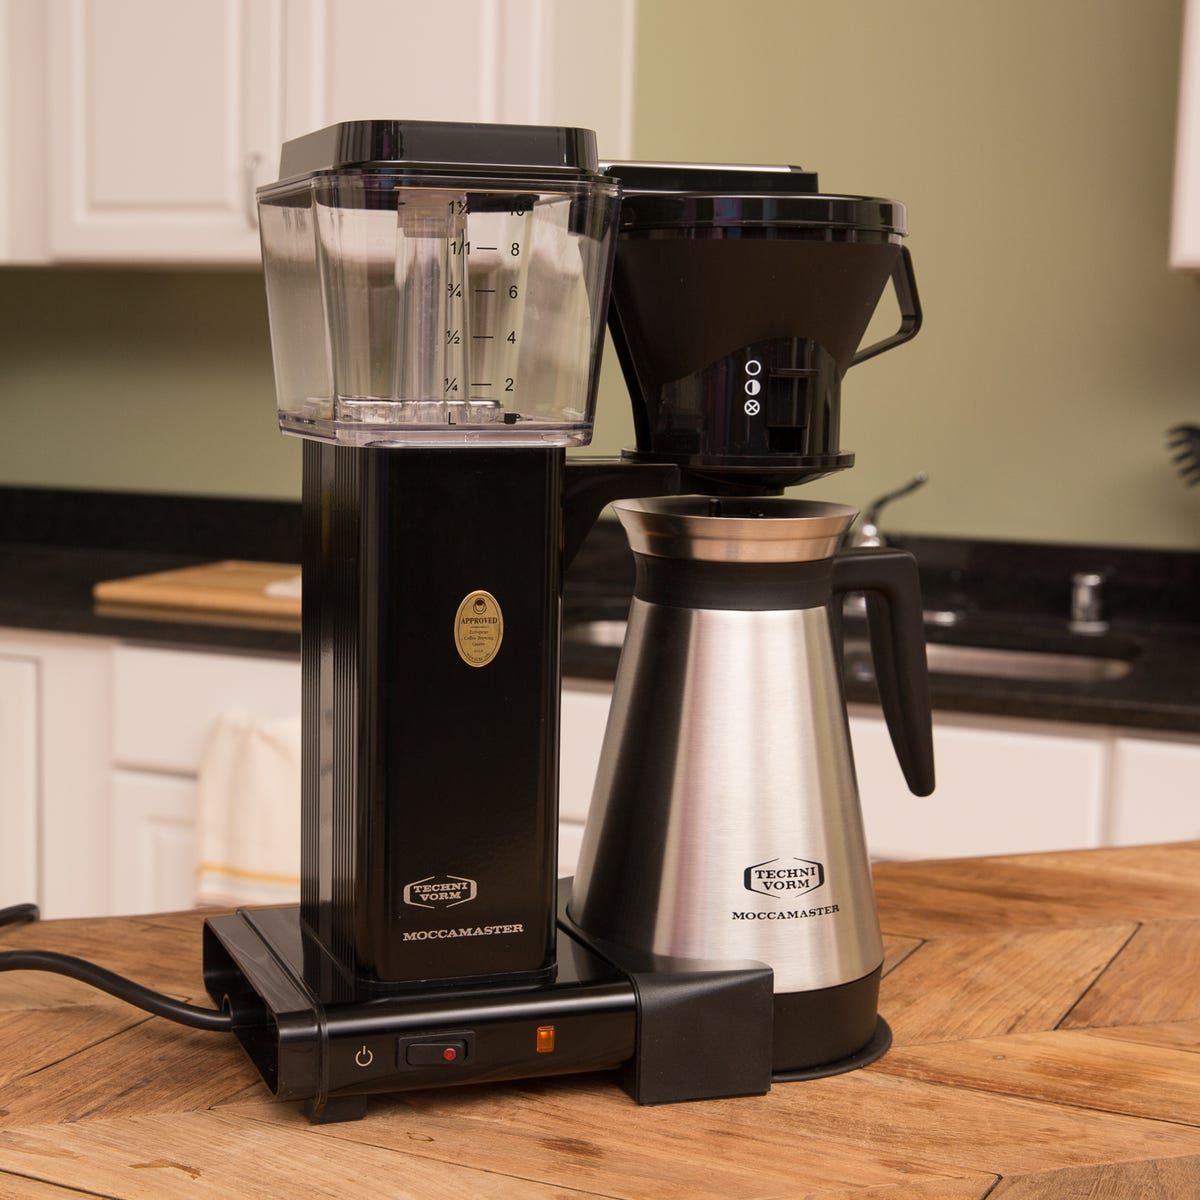 Technivorm Moccamaster KBT 741 review: This pricey Technivorm coffee maker  delivers masterful brews in style - CNET